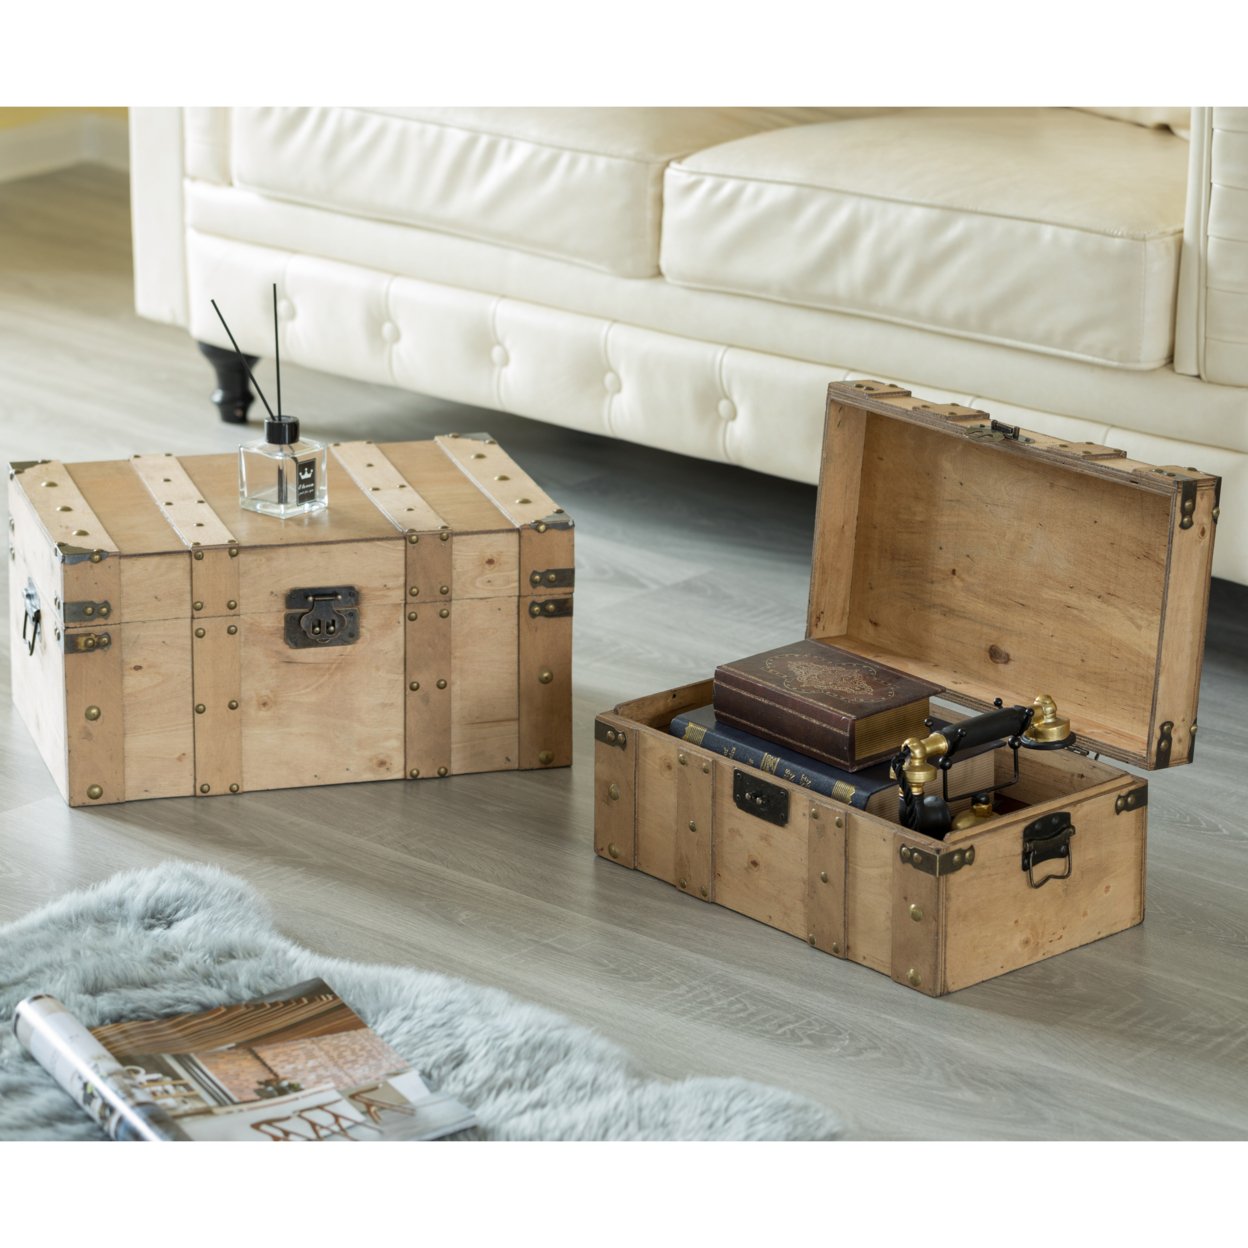 Natural Wooden Style Trunk With Handles - Set Of 2